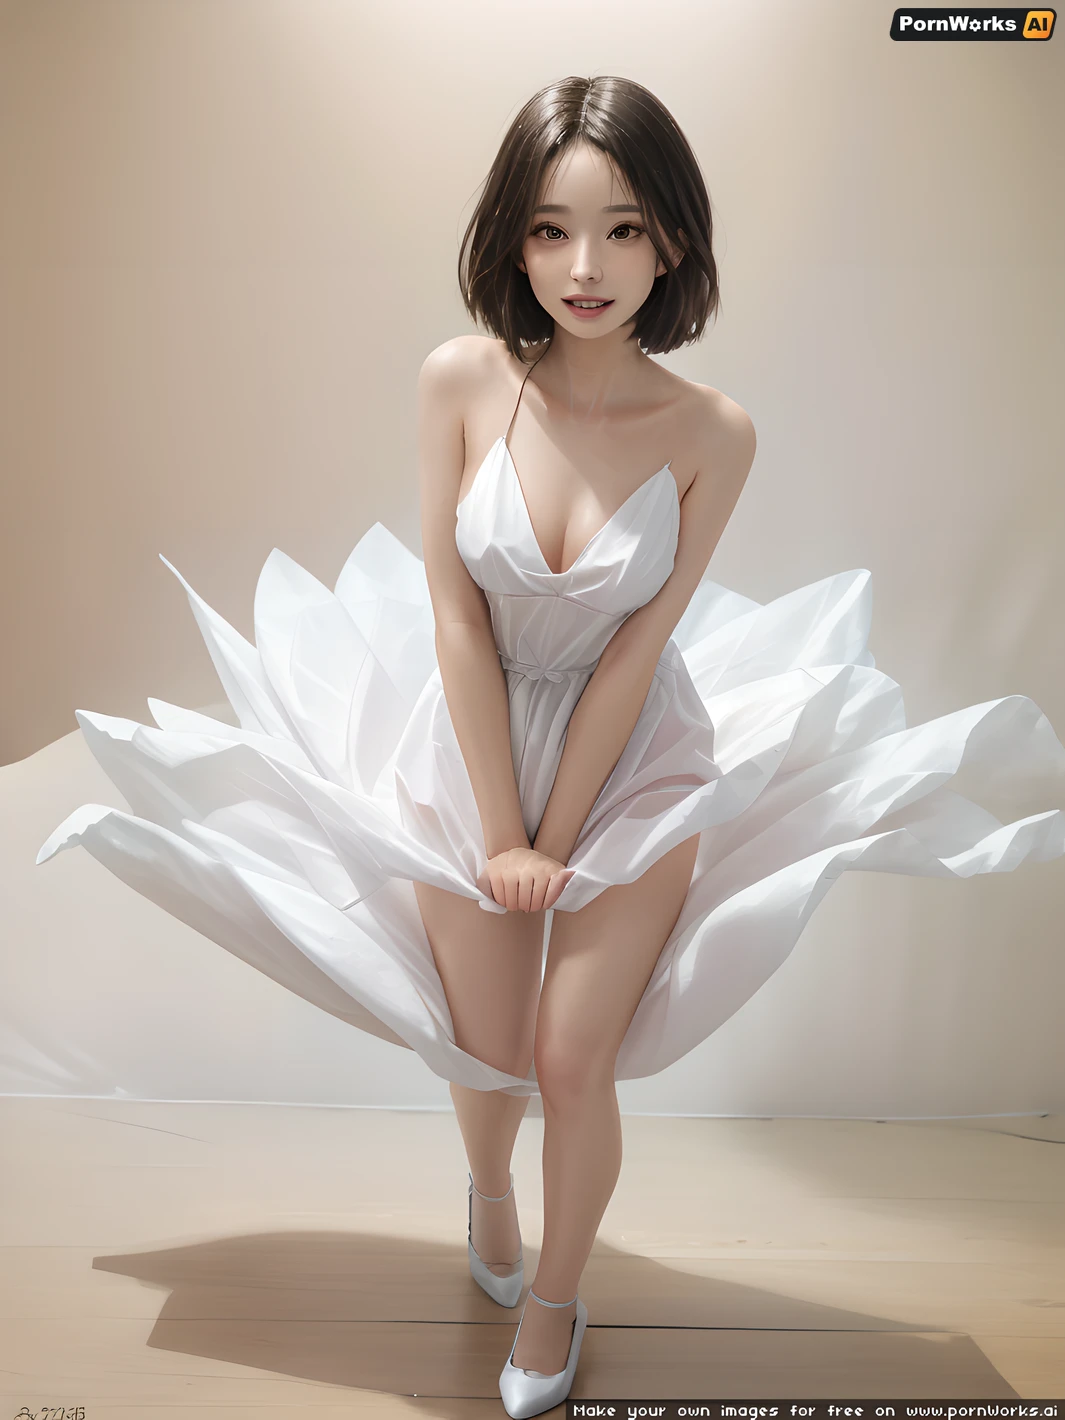 1065px x 1420px - The AI generated porn picture of a 20-year-old topless college emo lesbian  with perfect fingers, beautiful skin, and thin lips wearing silk long  dress. The woman is leaning forward, looking at the